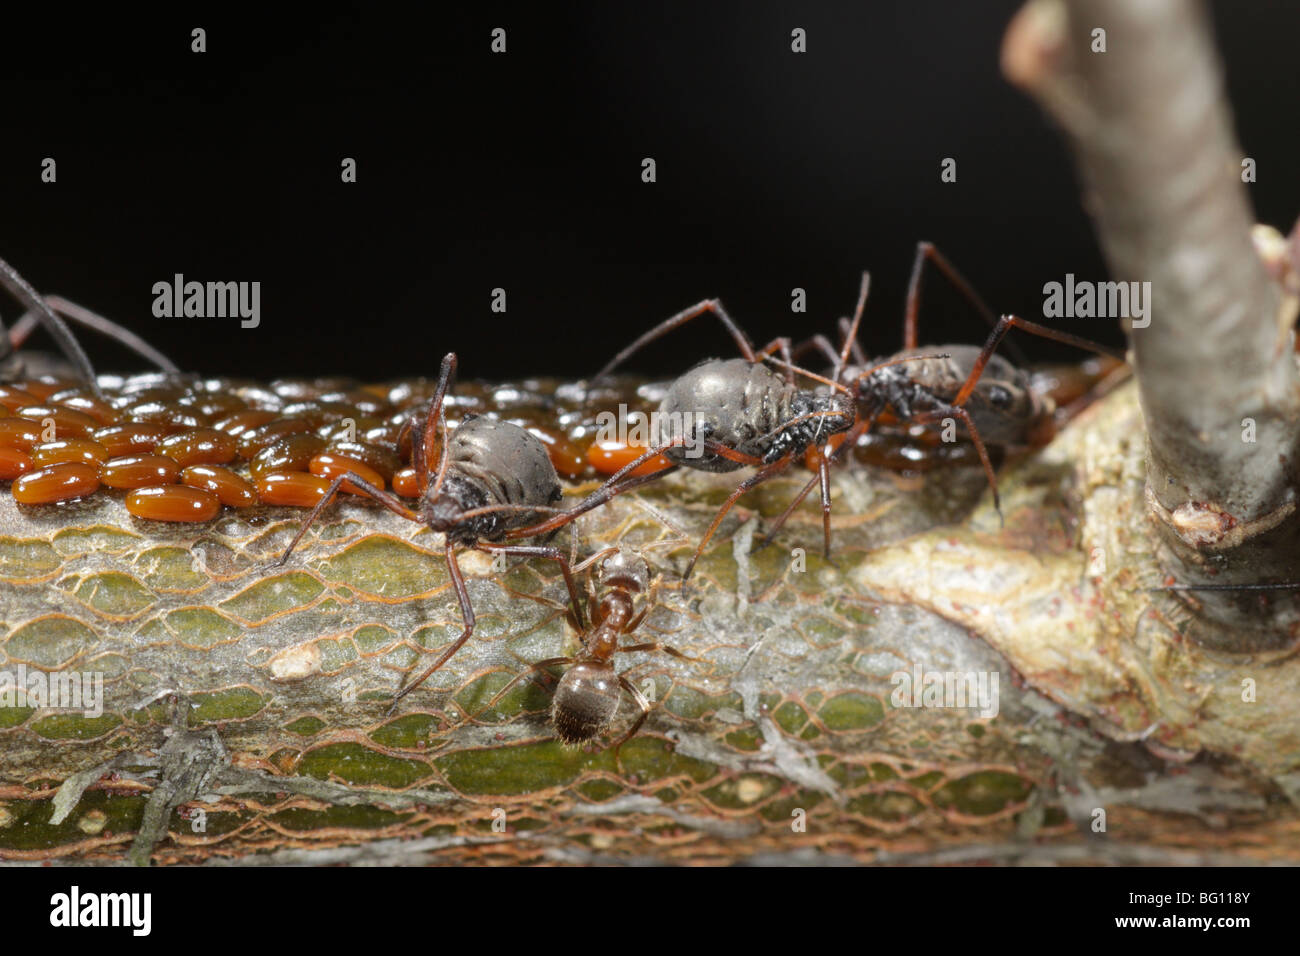 Aphids (Lachnus roboris) on an oak. They have laid eggs and are being guarded and milked by ants (Lasius niger) Stock Photo